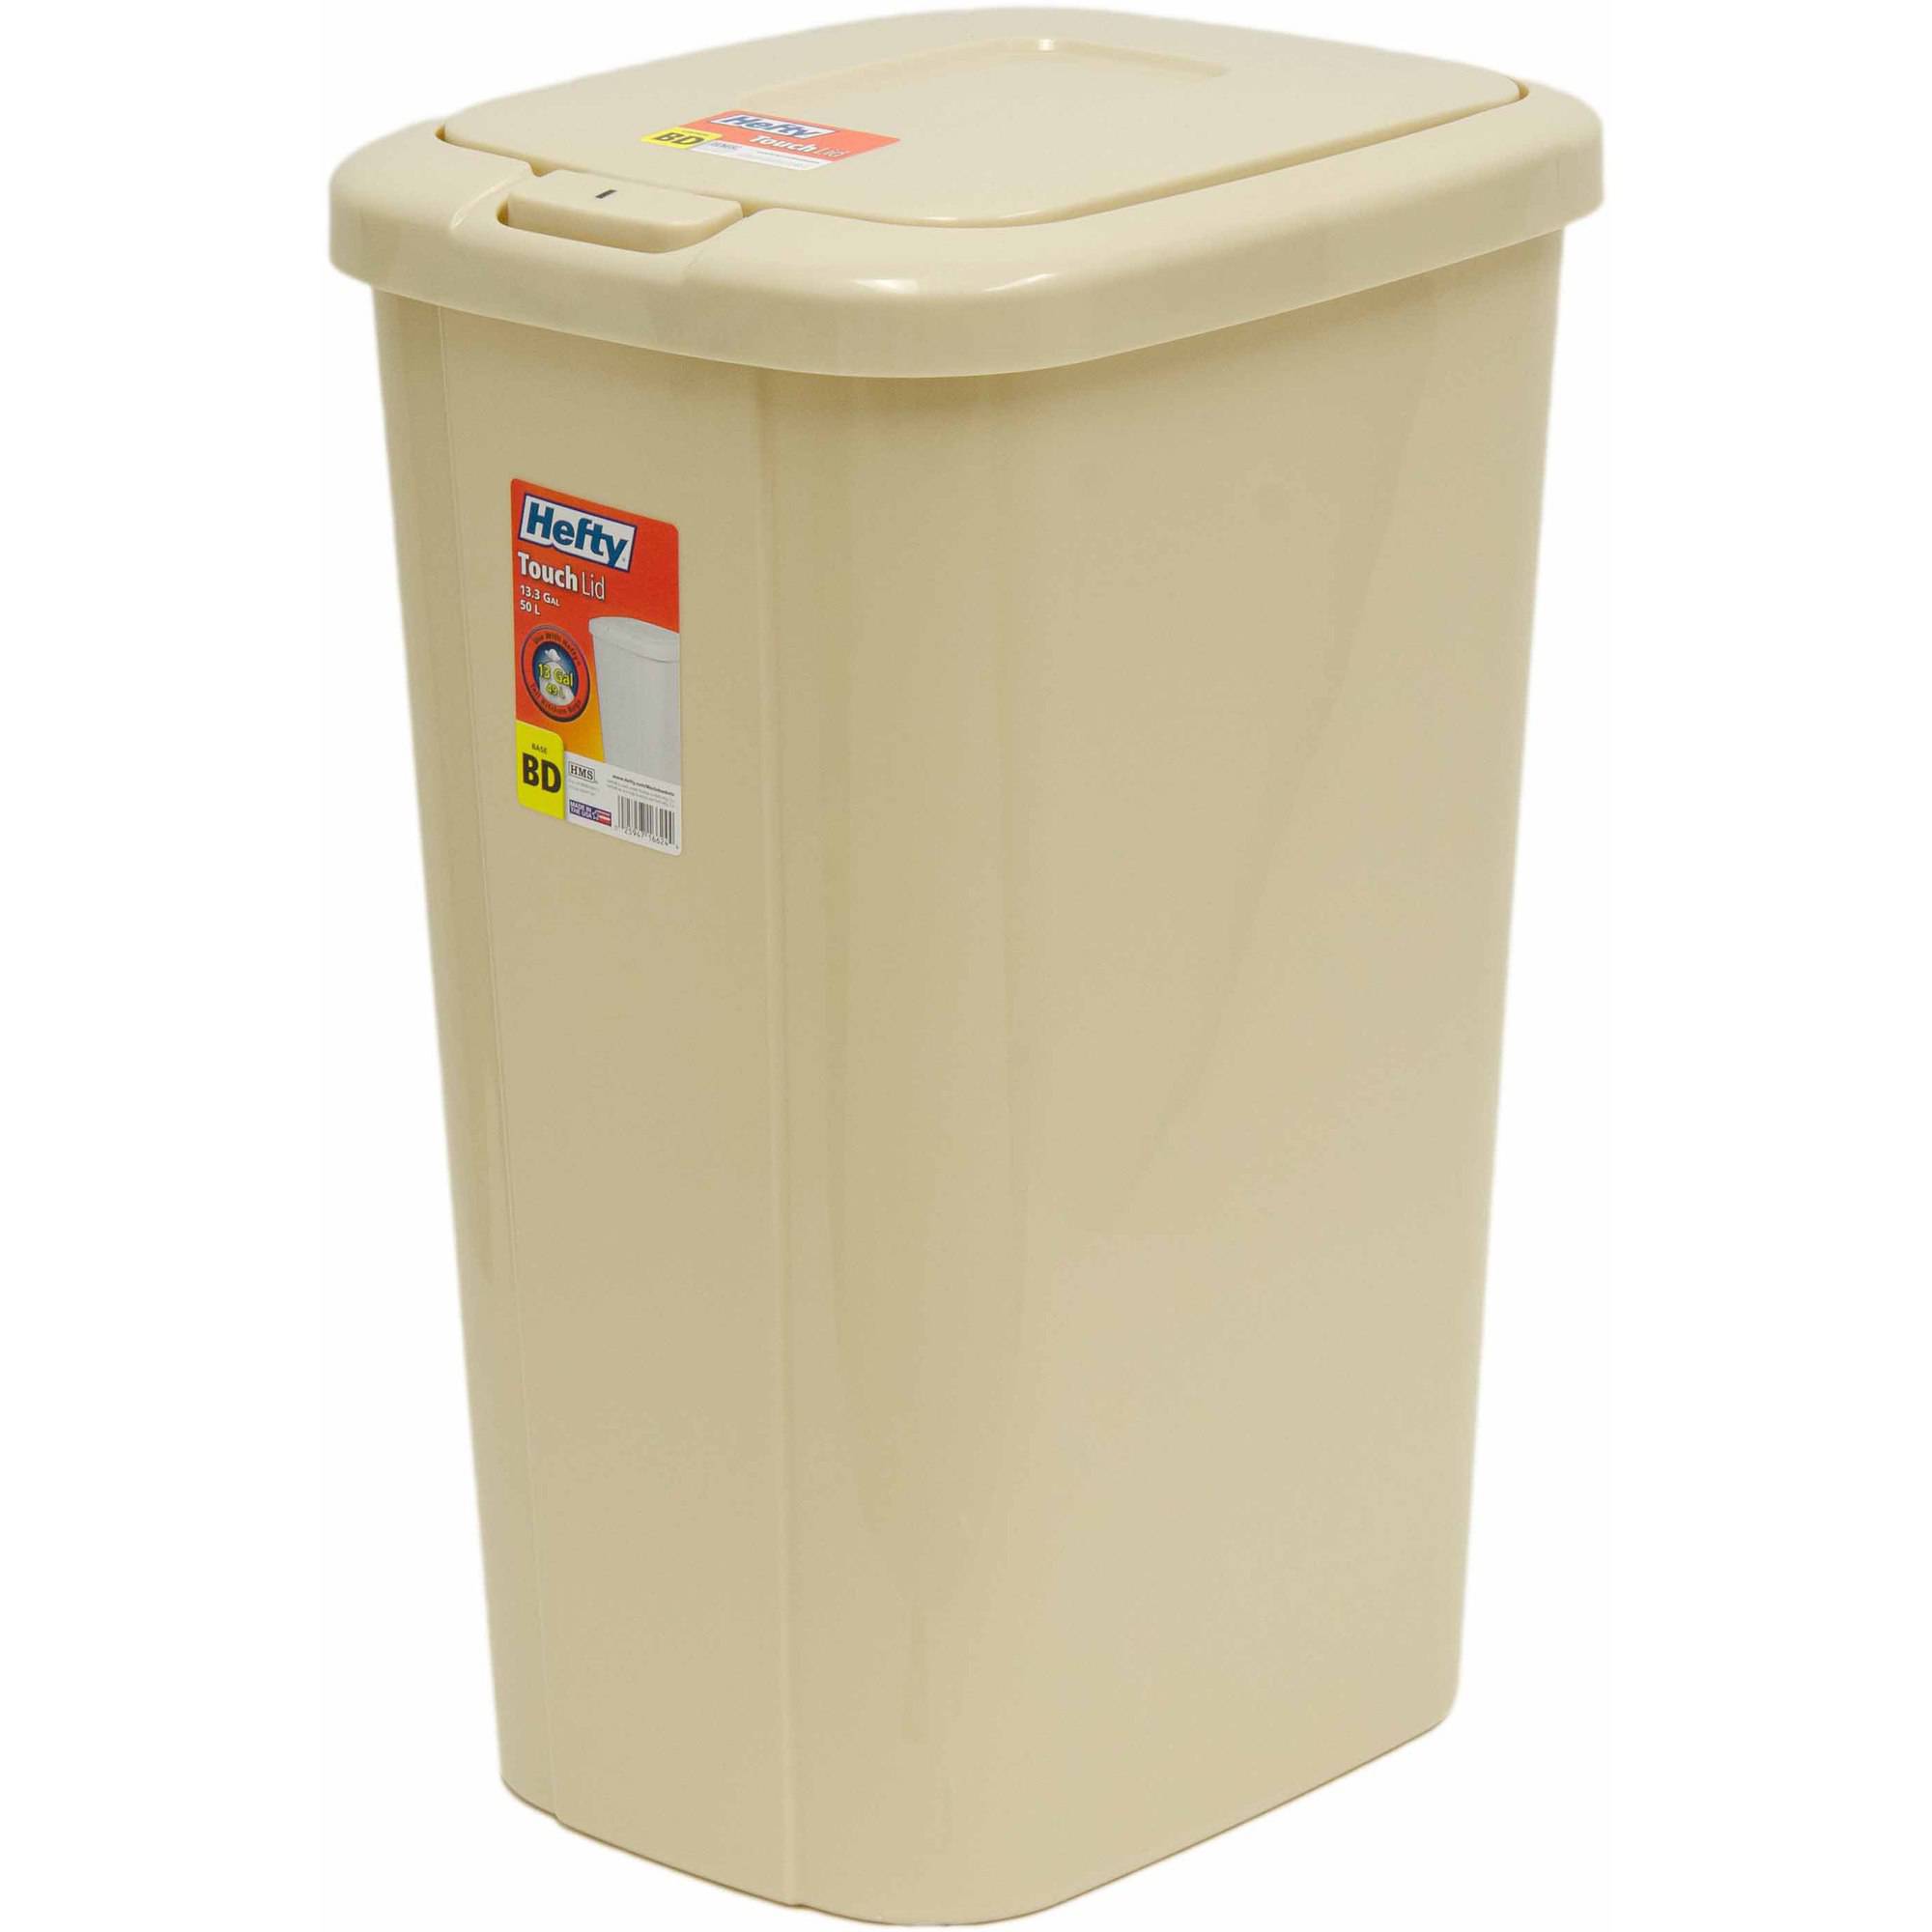 Hefty Touch-Lid 13.3-Gallon Trash Can, Multiple Colors - image 1 of 4